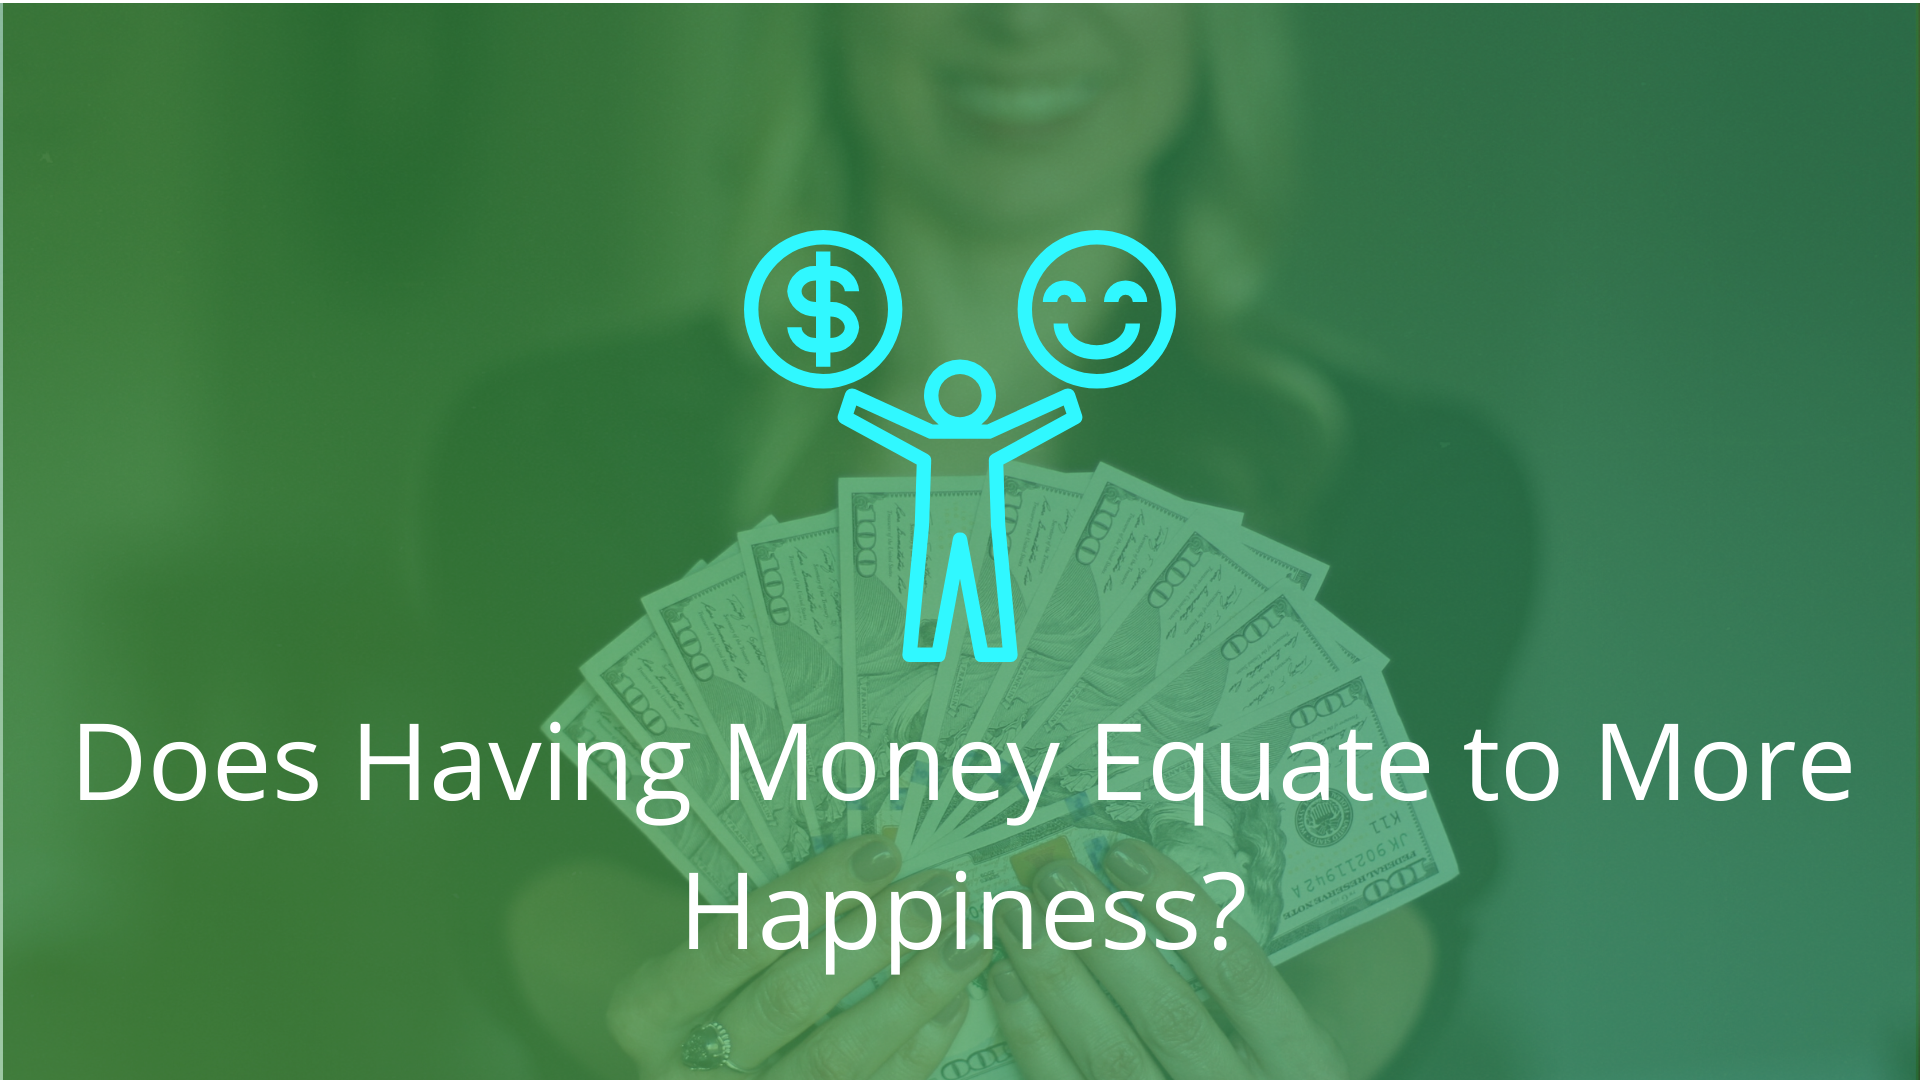 Does Having Money Equate to More Happiness?-Financial Symmetry, Inc.